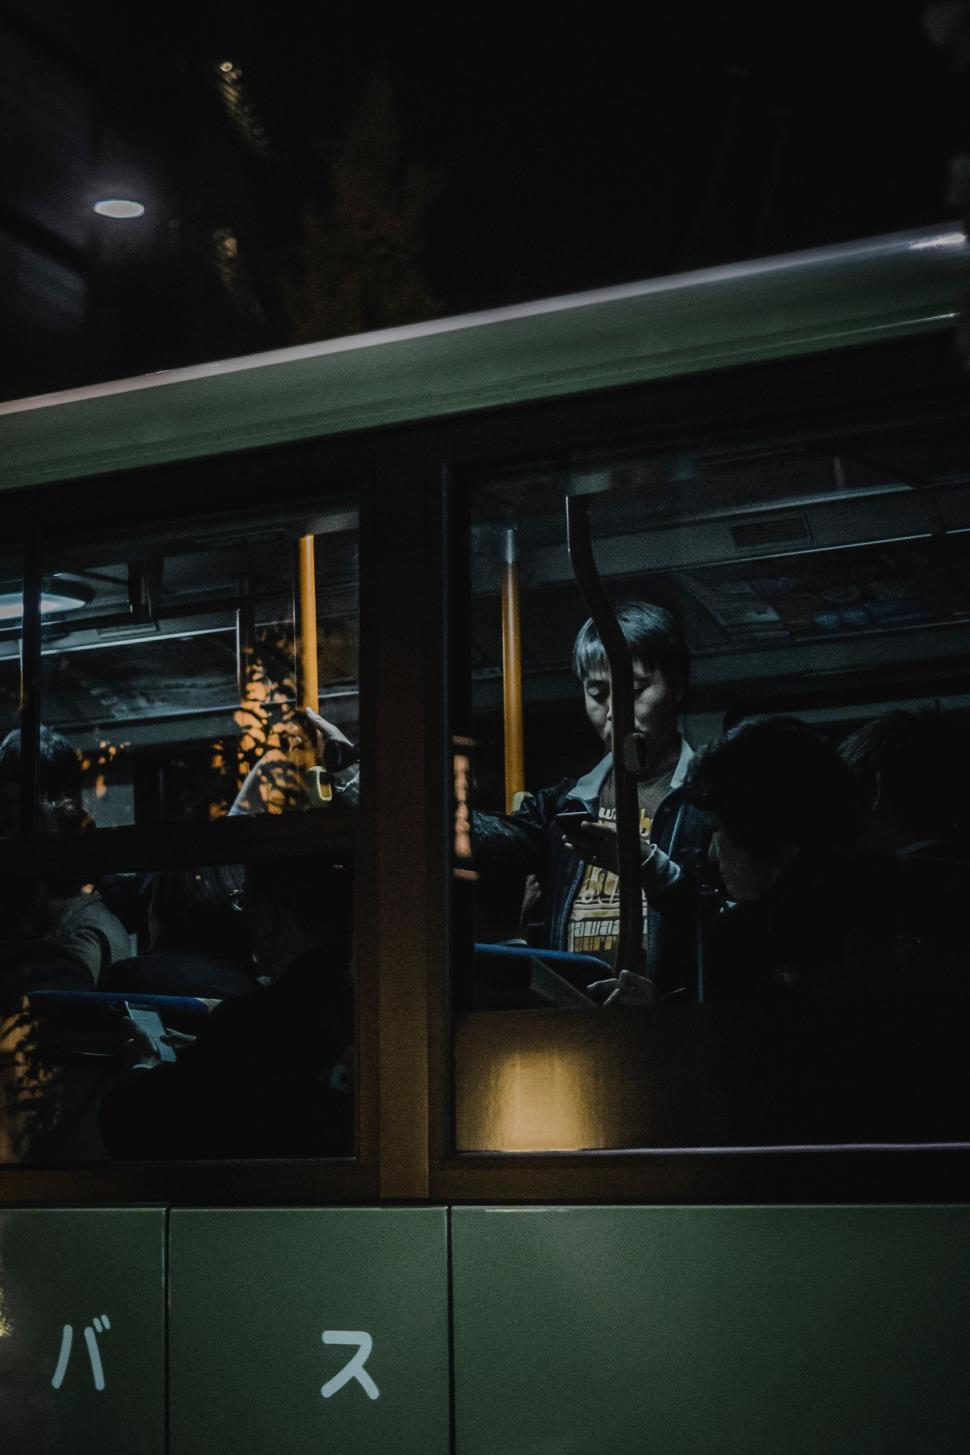 Free Image of Woman Sitting in Bus Looking Out the Window 